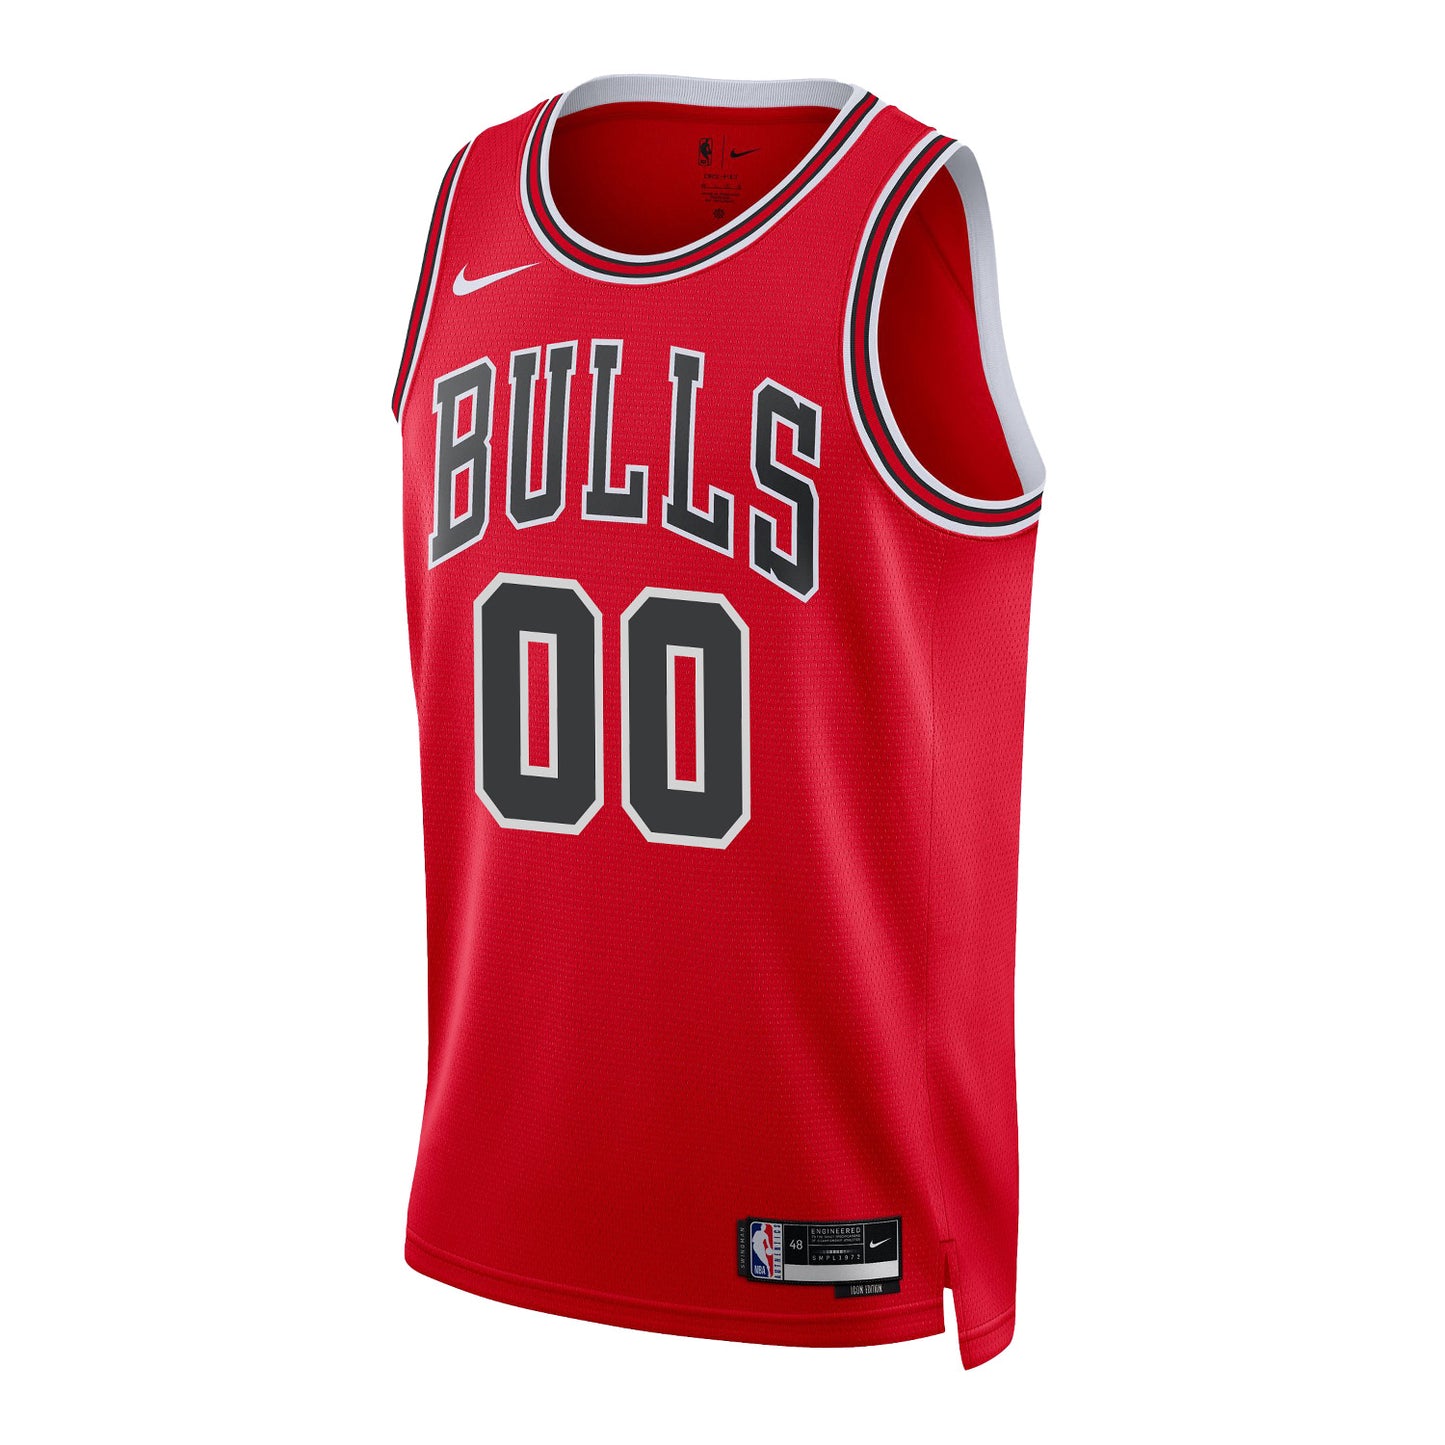 Youth Chicago Bulls Personalized Nike Icon Swingman Jersey in red - front  view